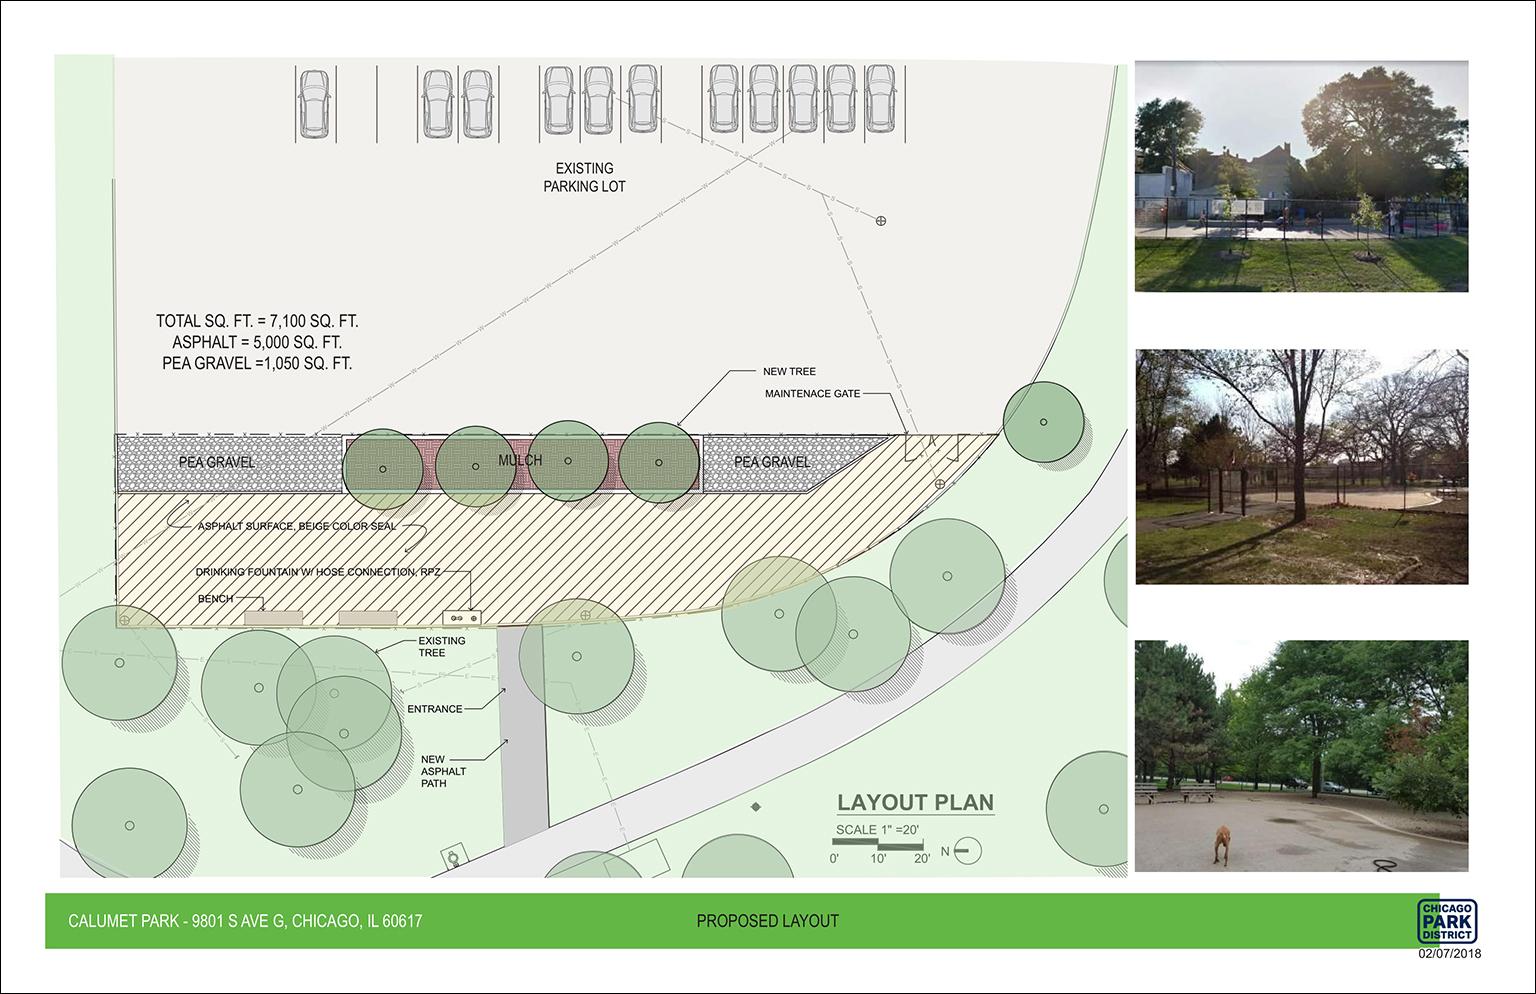 The new dog park at Calumet Park will be surfaced with asphalt and pea gravel and will feature trees, benches and a drinking fountain. (Chicago Park District)